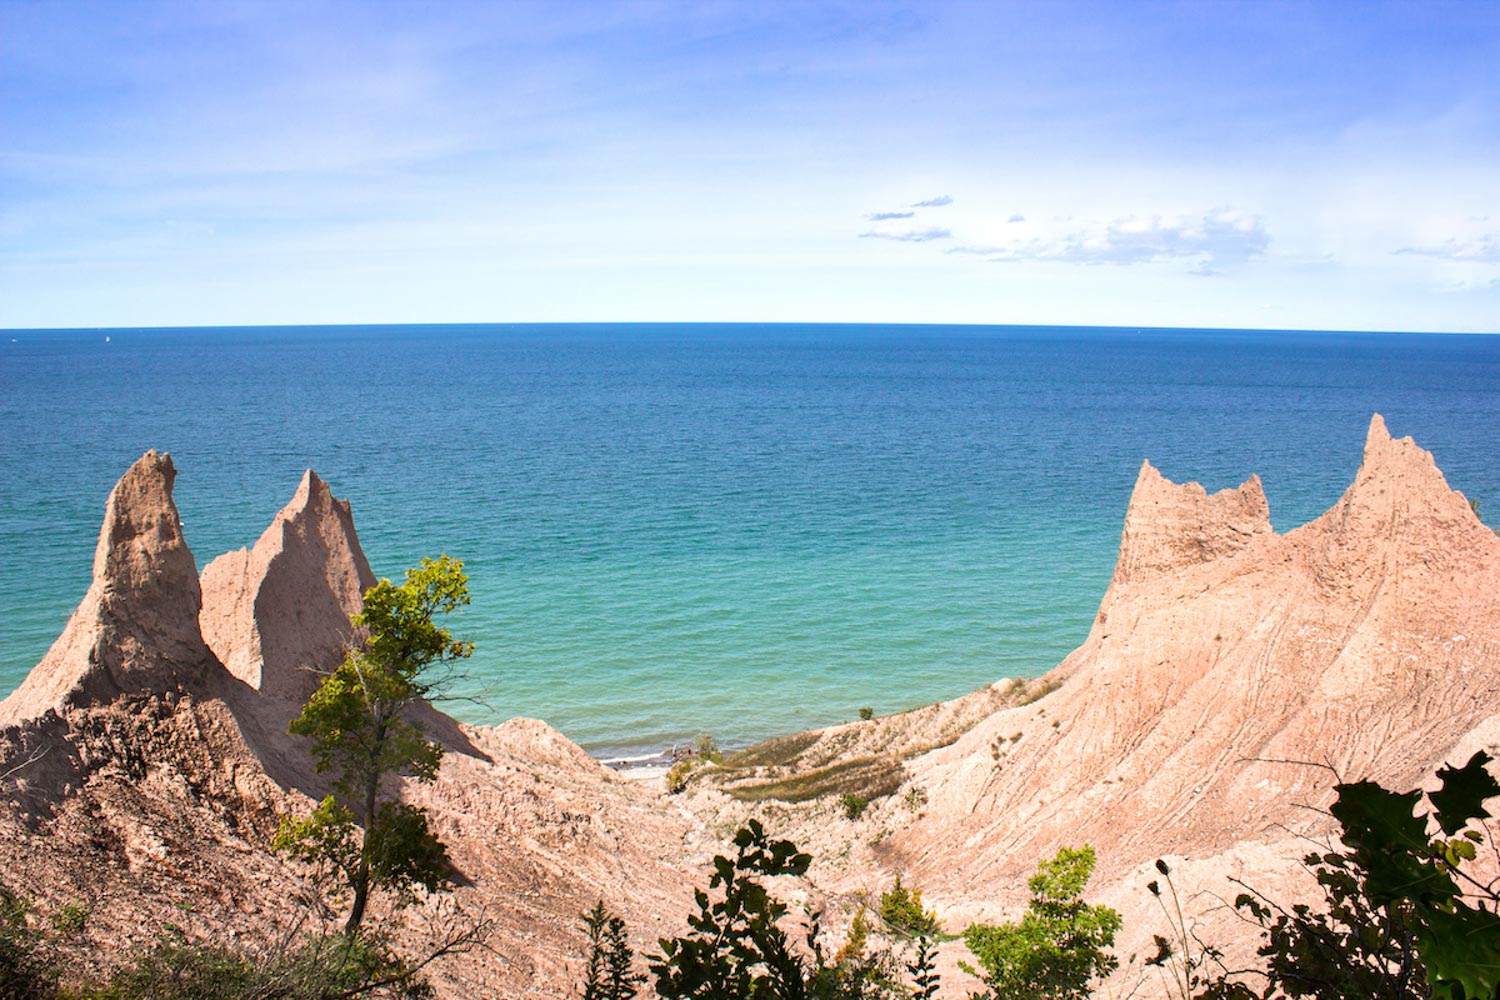 The waters from the Chimney Bluffs State Park